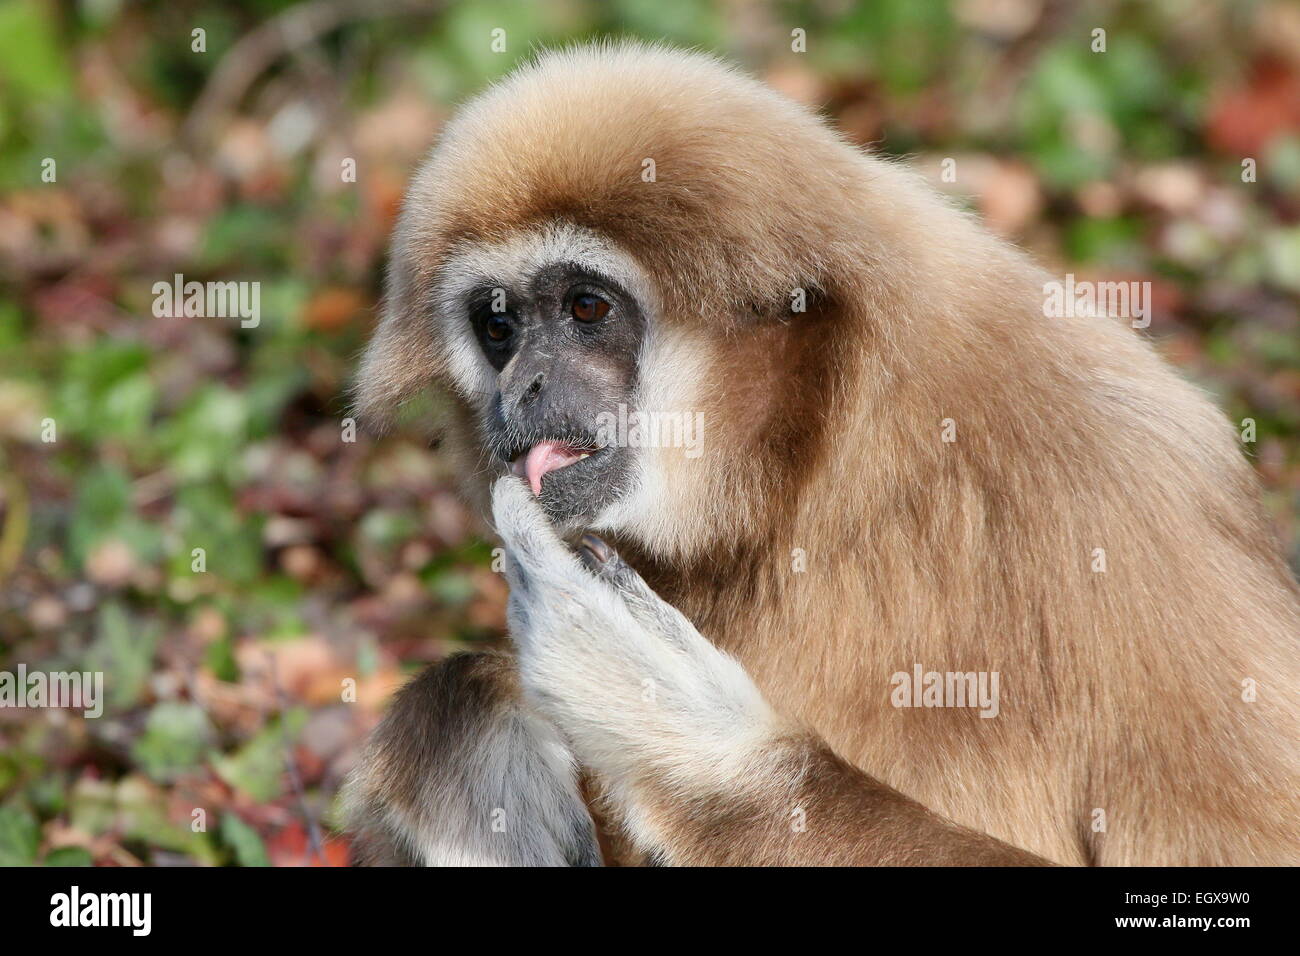 Closeup of the head of an Asian Lar Gibbon or  White-Handed gibbon (Hylobates lar) posing on the ground Stock Photo